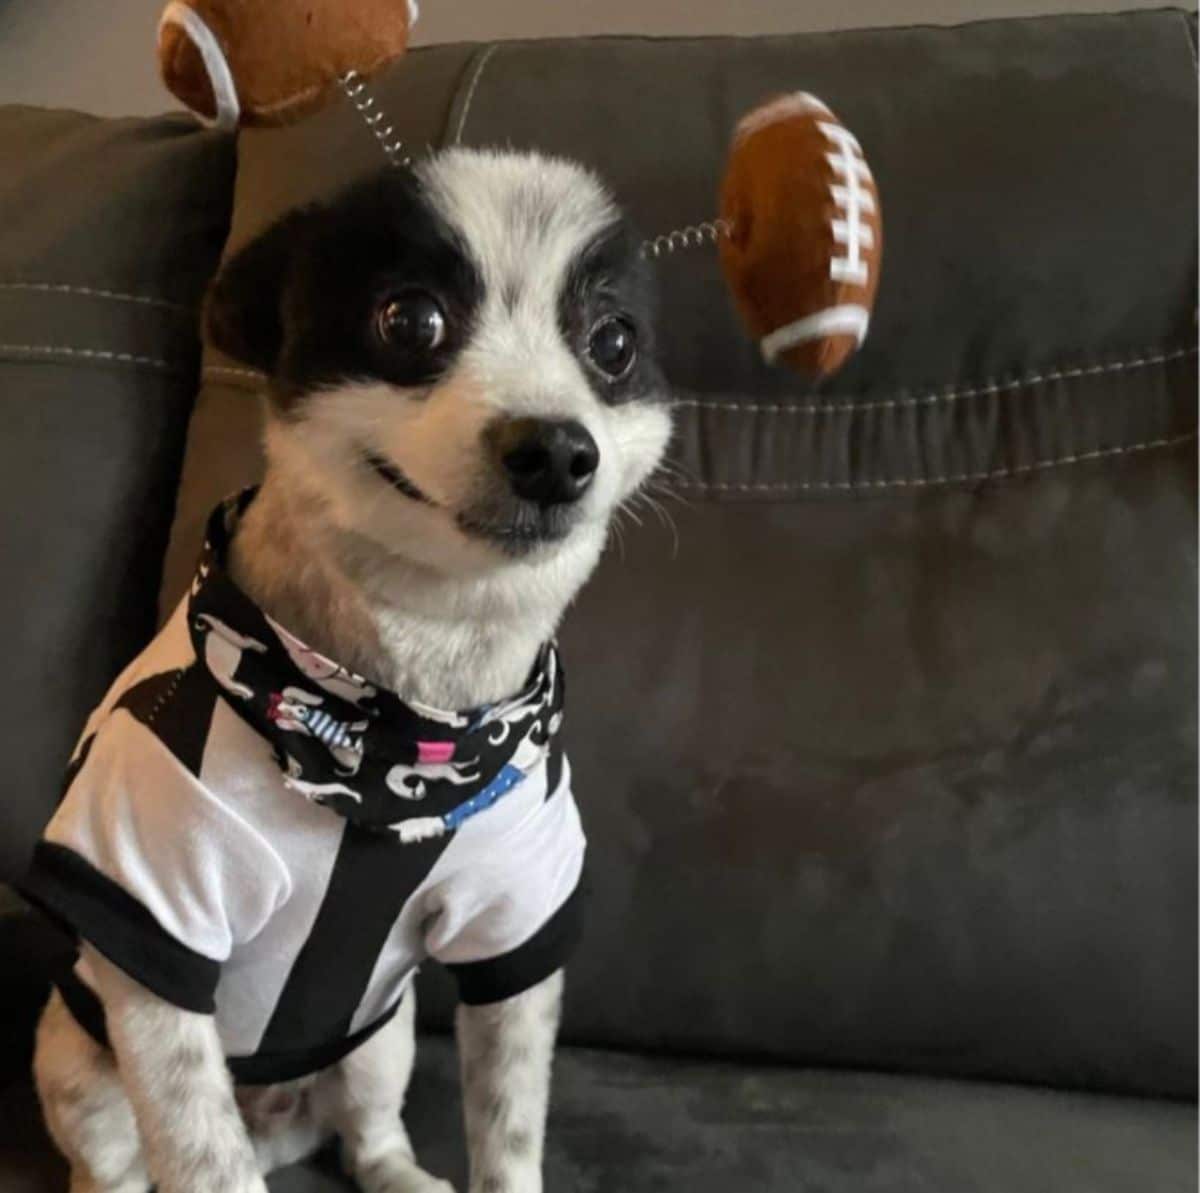 black and white dog who looks like he's smiling sitting on a brown sofa wearing a headband with brown and white footballs on either side and wearing a black and white shirt